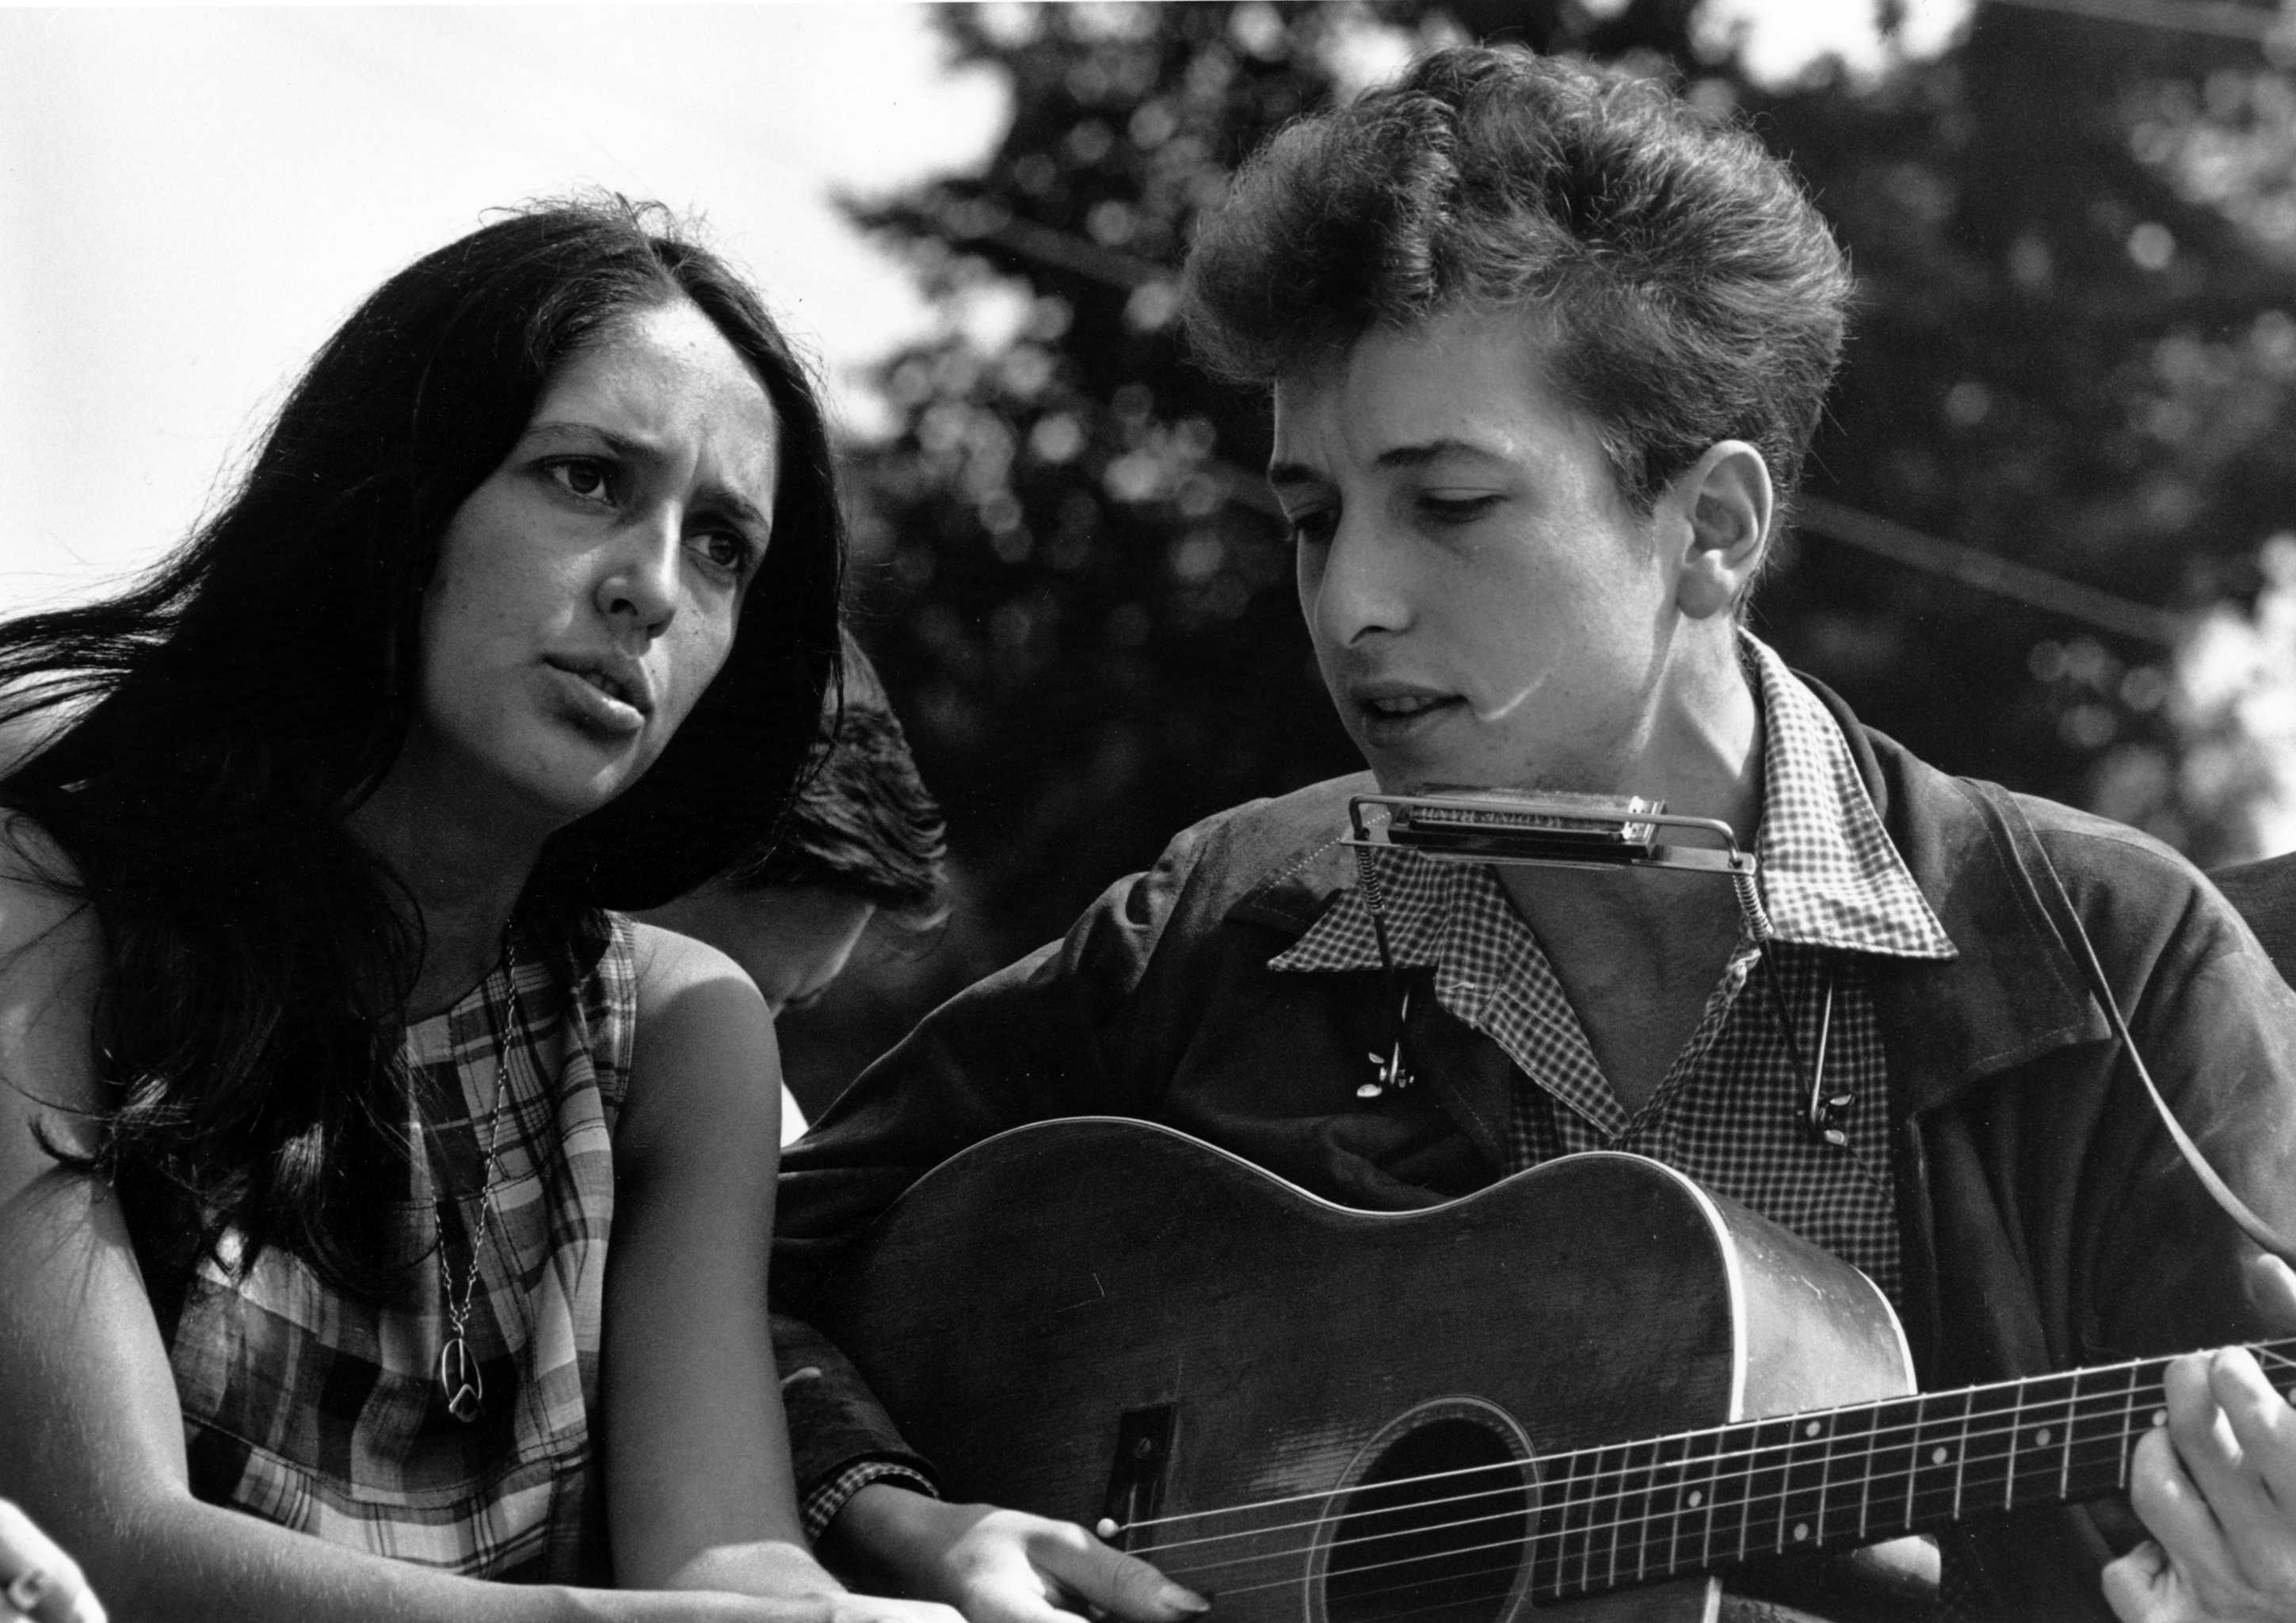 Joan Baez and Bob Dylan. Image courtesy of wikipedia.org.